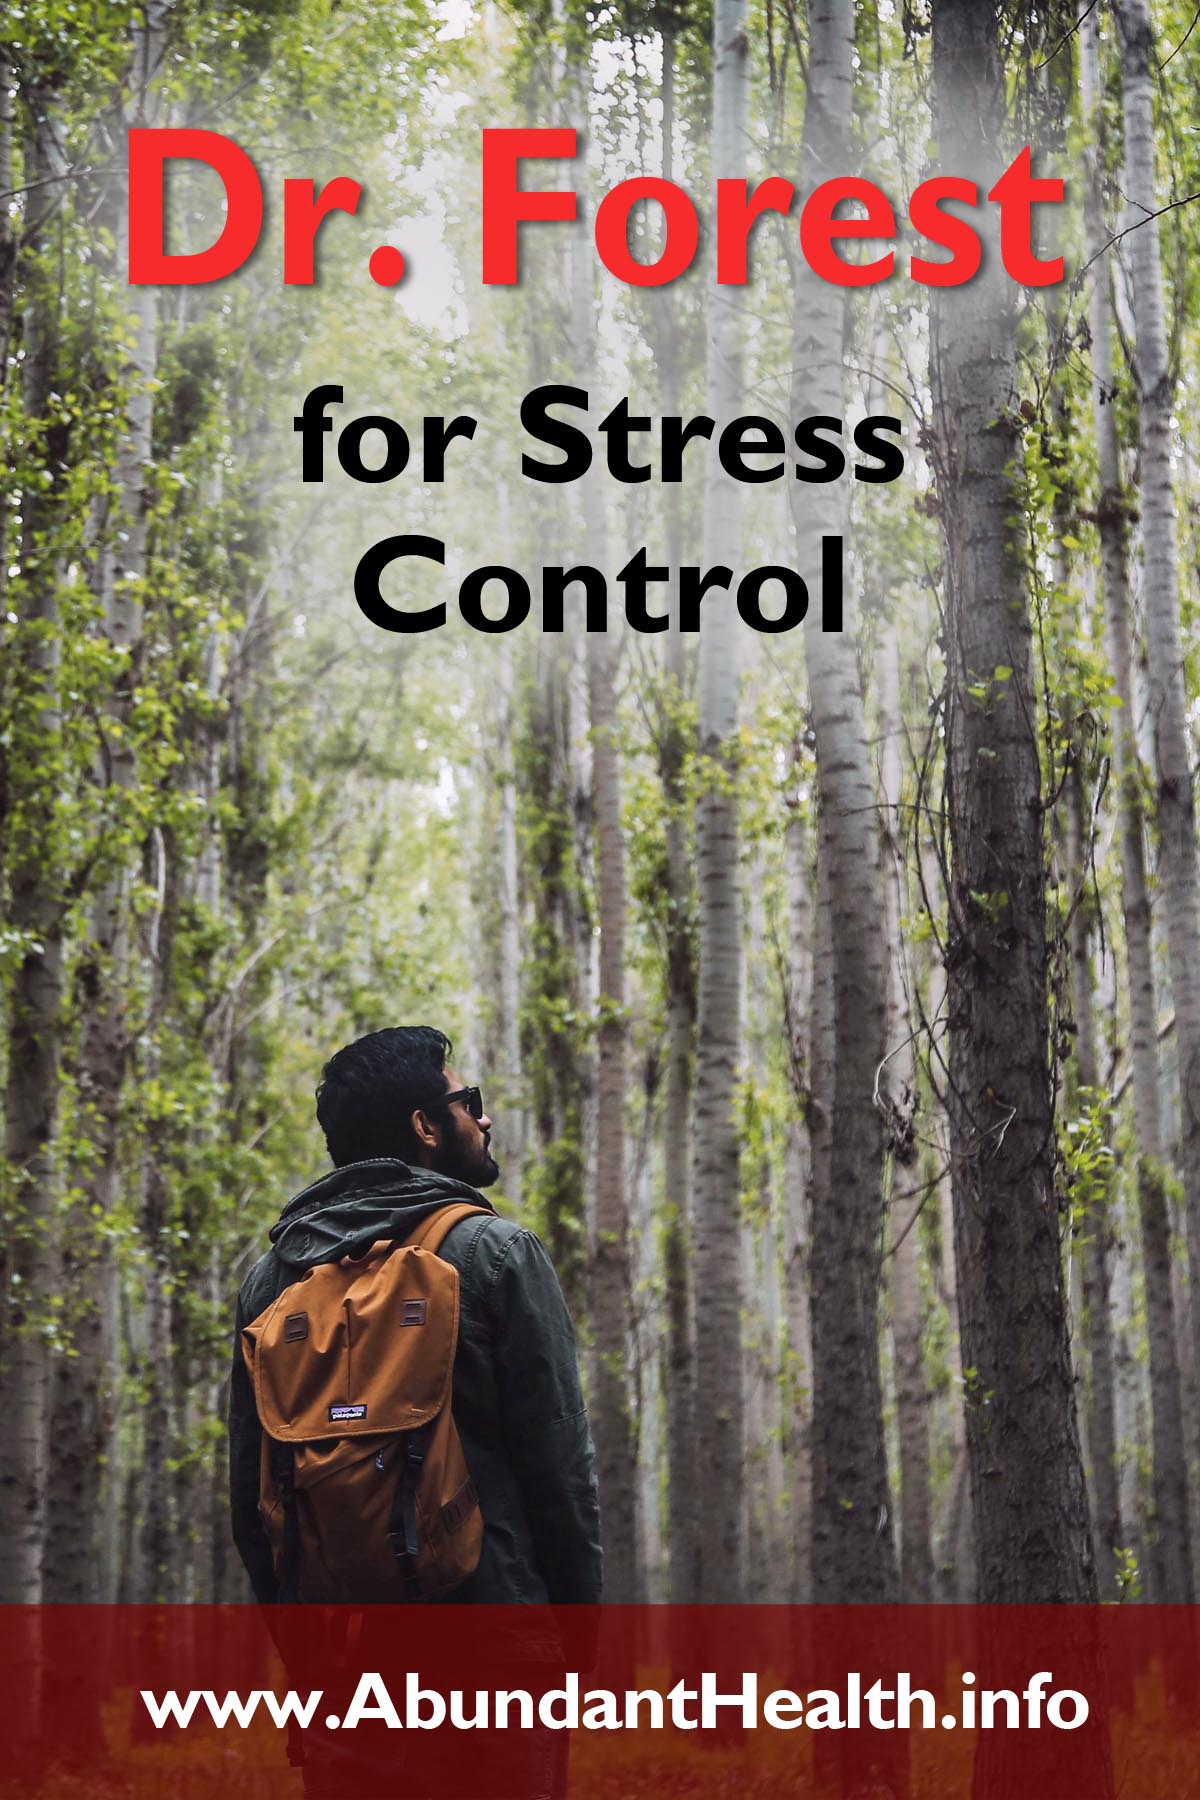 Dr. Forest for Stress Control